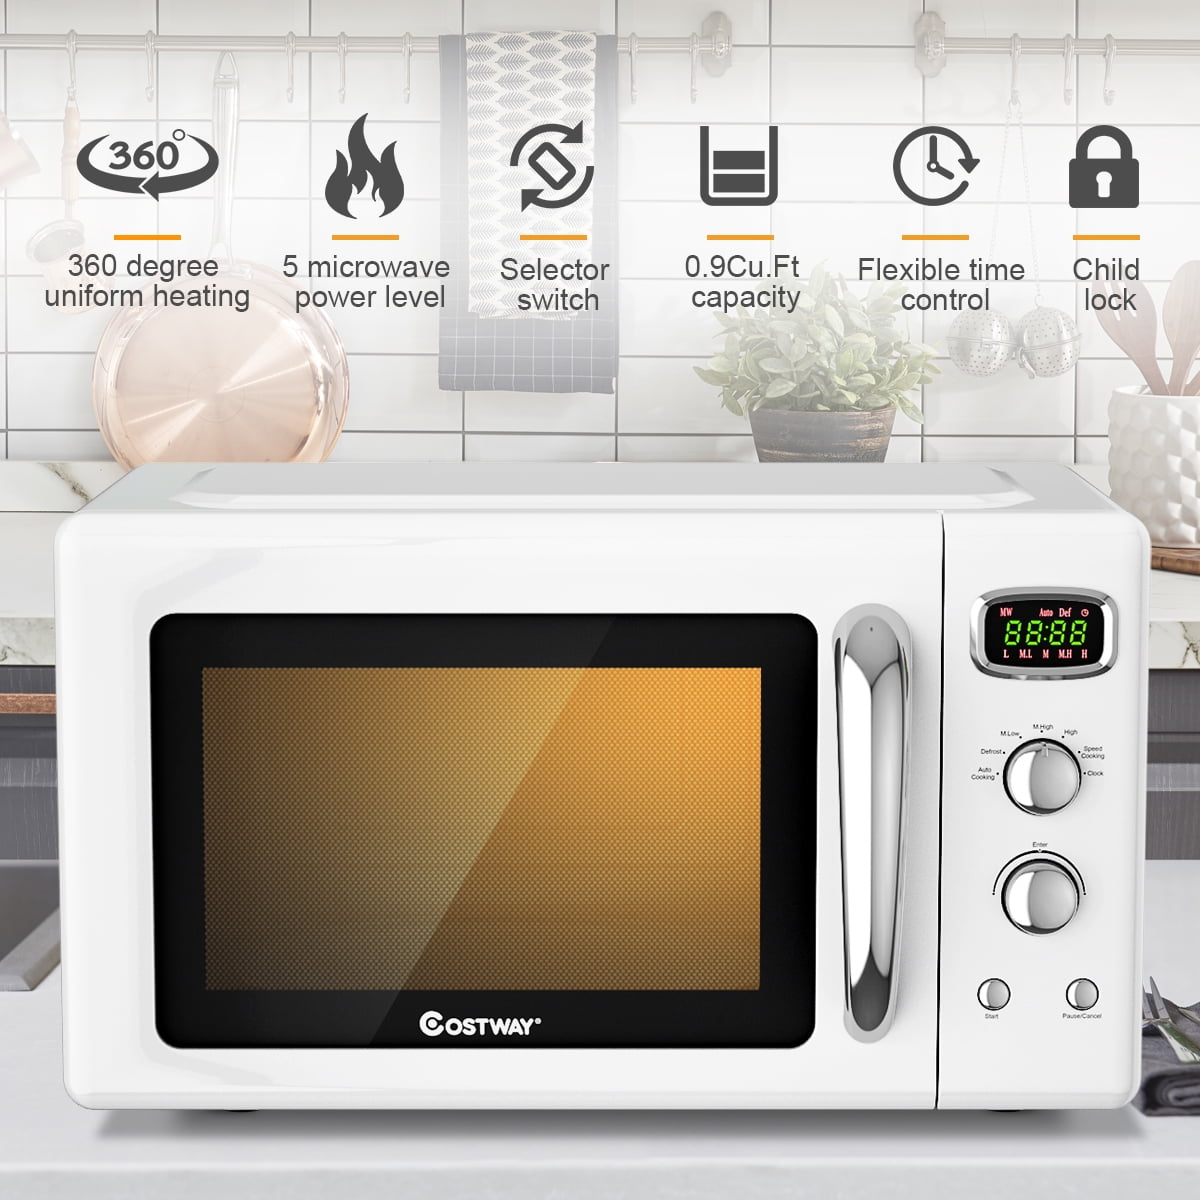 the Compact Smart Oven®